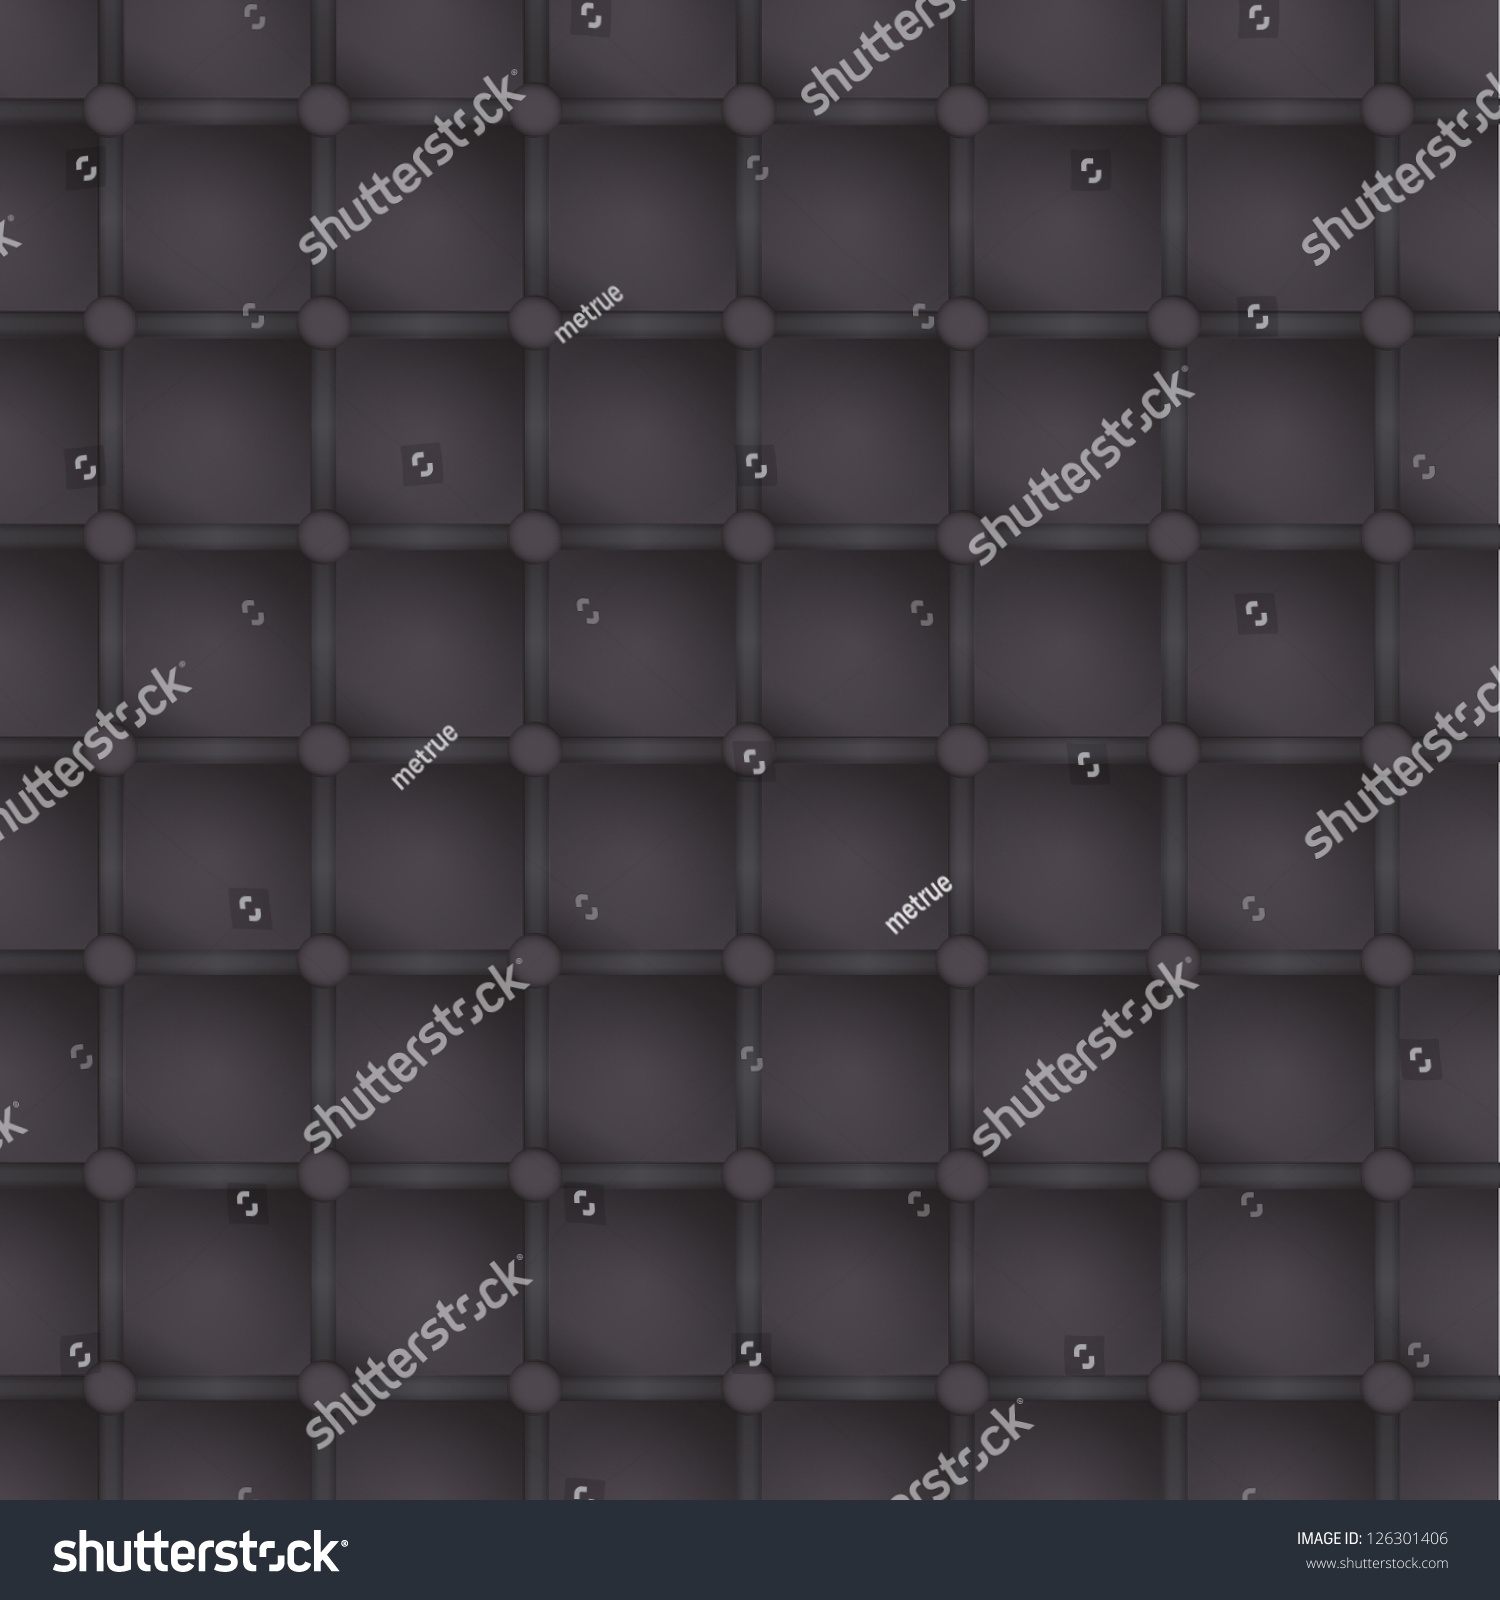 New Textured Background Can Use Like Stock Illustration